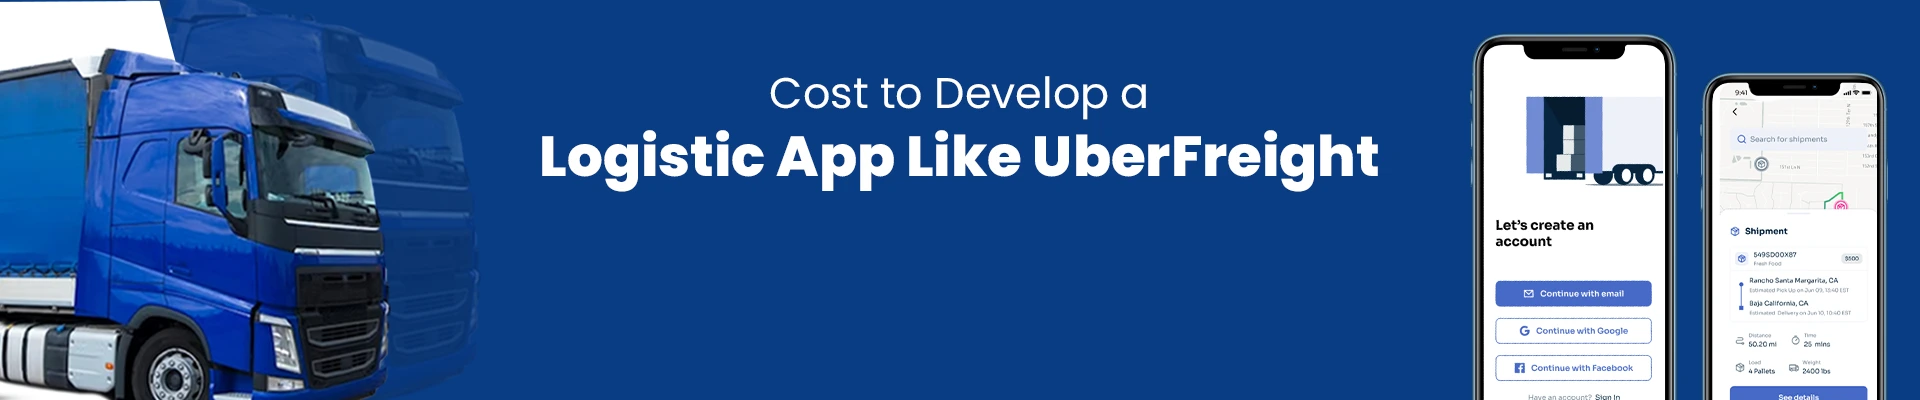 cost to develop a logistic app like Uber freight